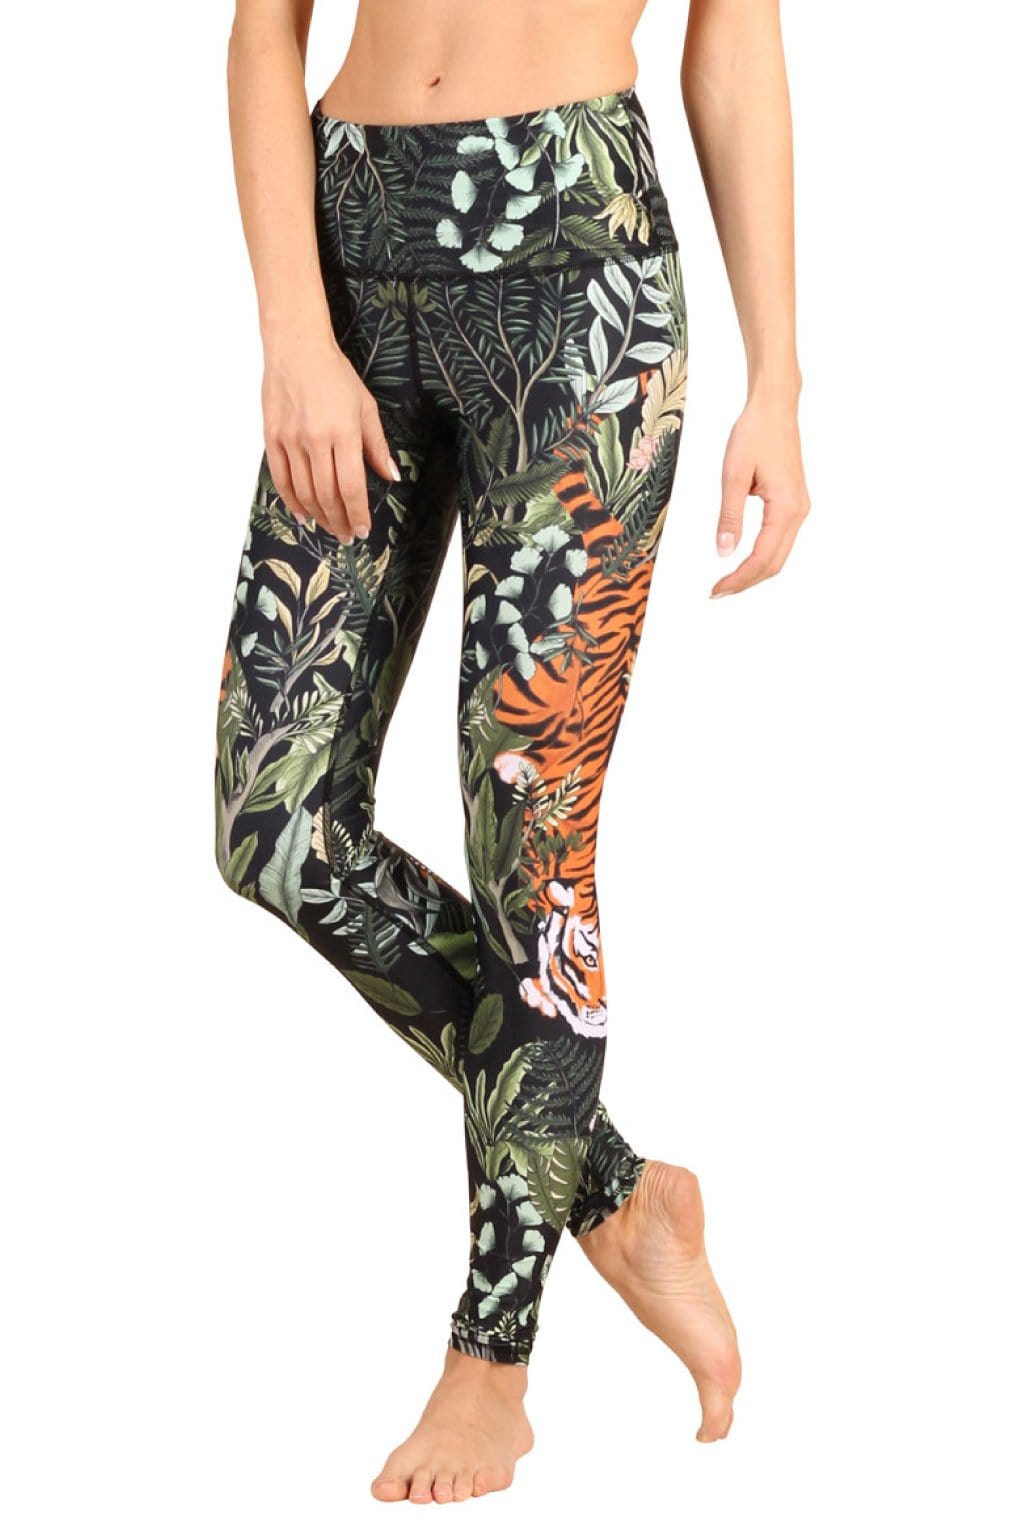 Your New Emotional Support Yoga Pants Are Here (And Editor-Approved)